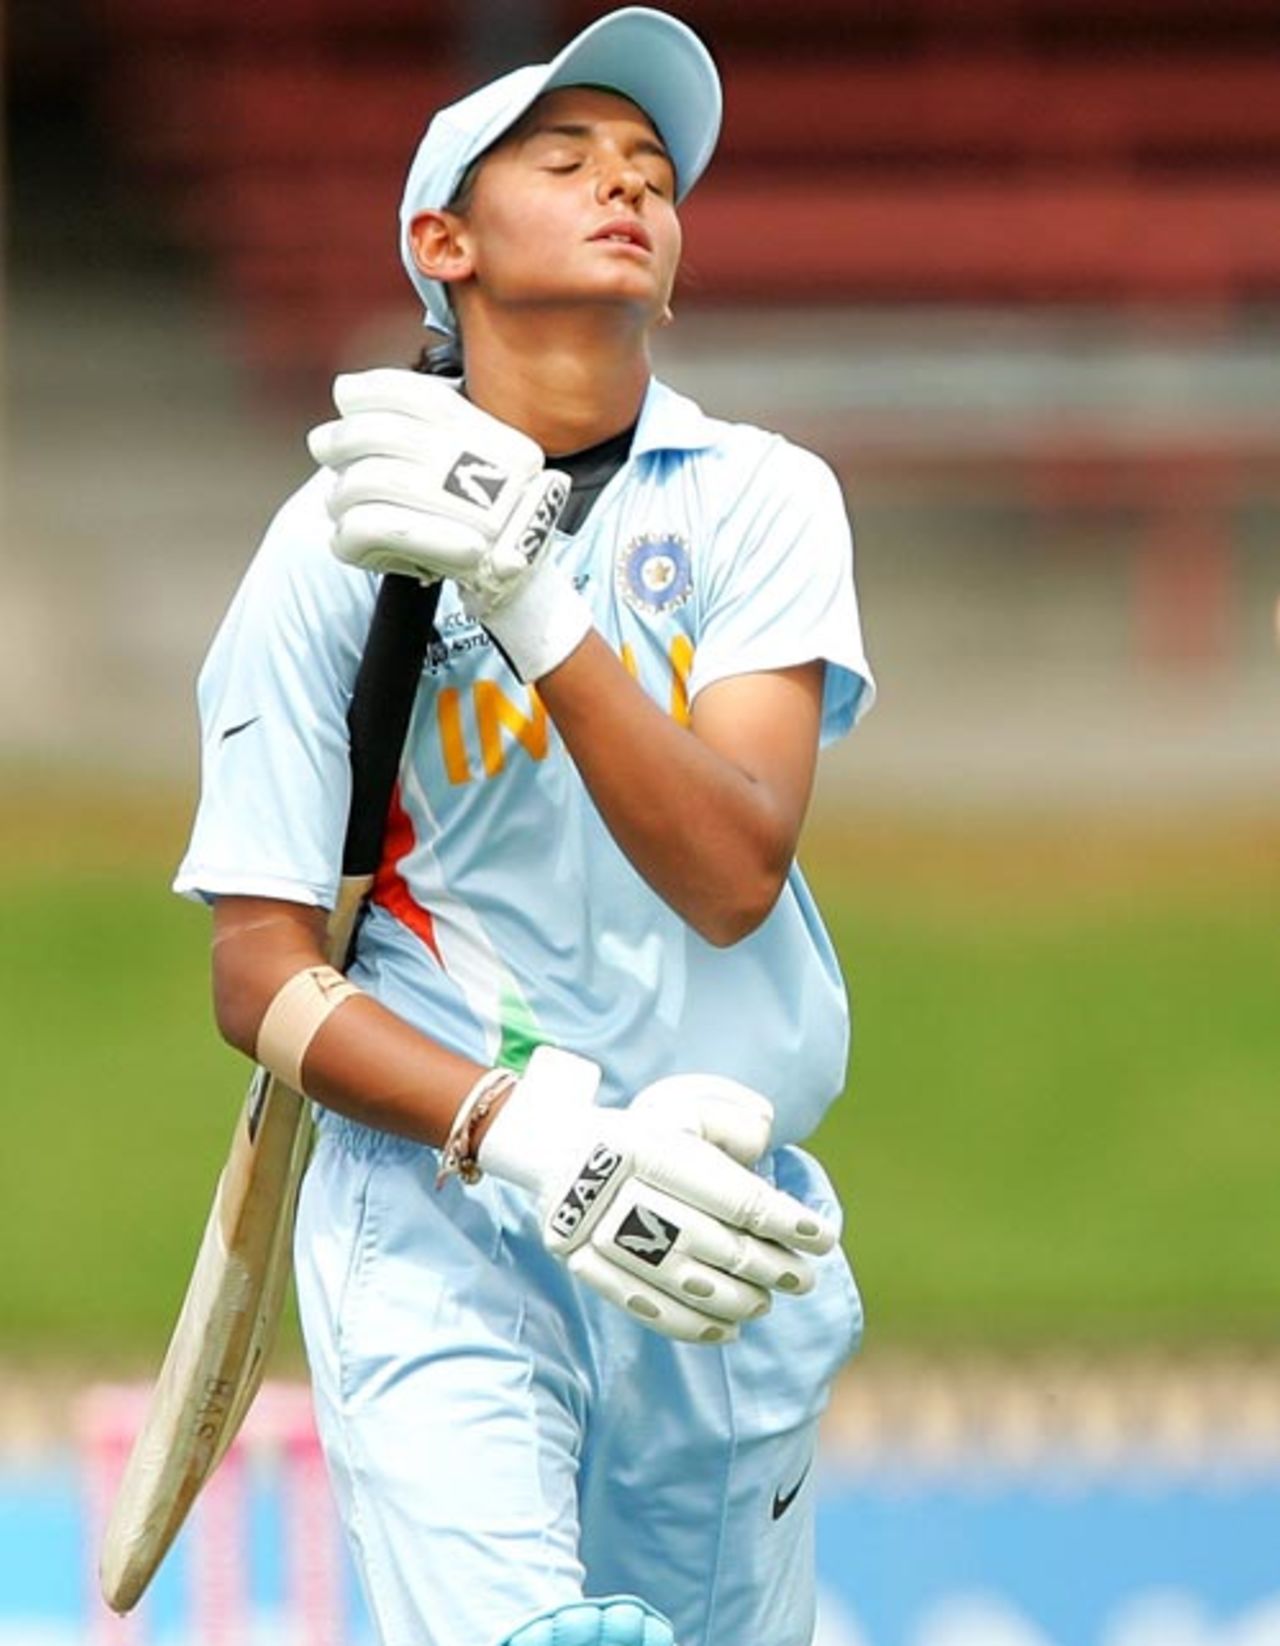 Harmanpreet Kaur trudges off after being dismissed for 8, England v India, Group B, women's World Cup, Sydney, March 10, 2009
